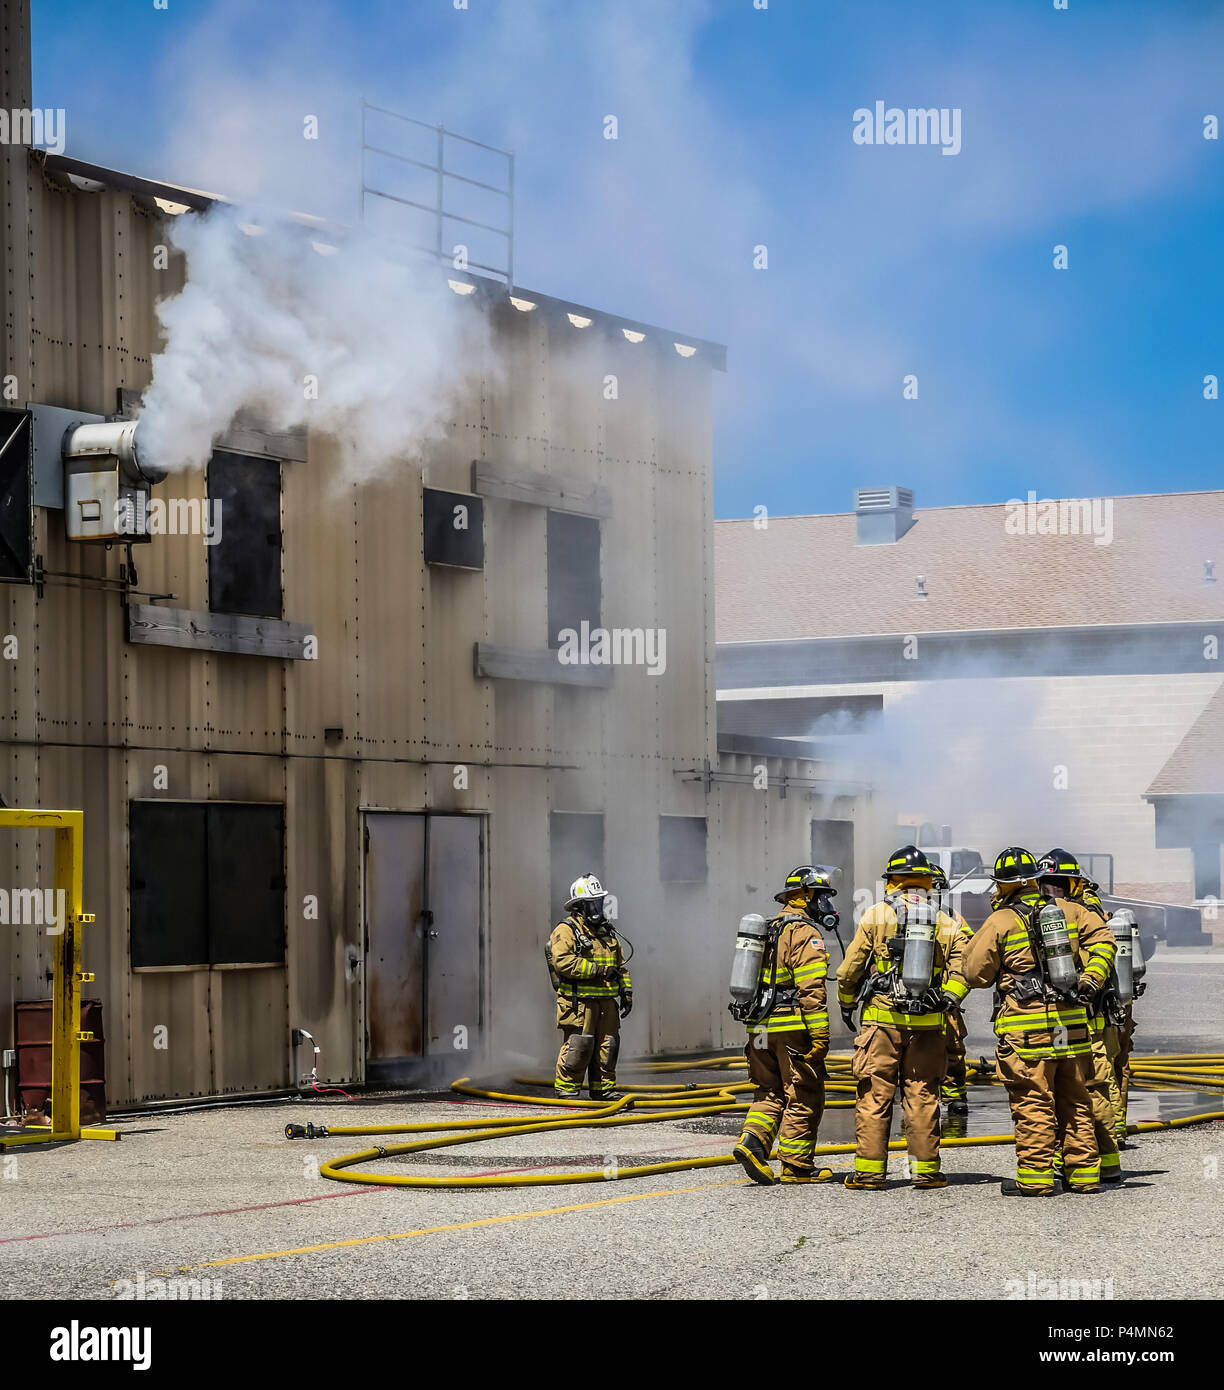 Firefighters in full turnout gear standing outside a burn building for training. Stock Photo